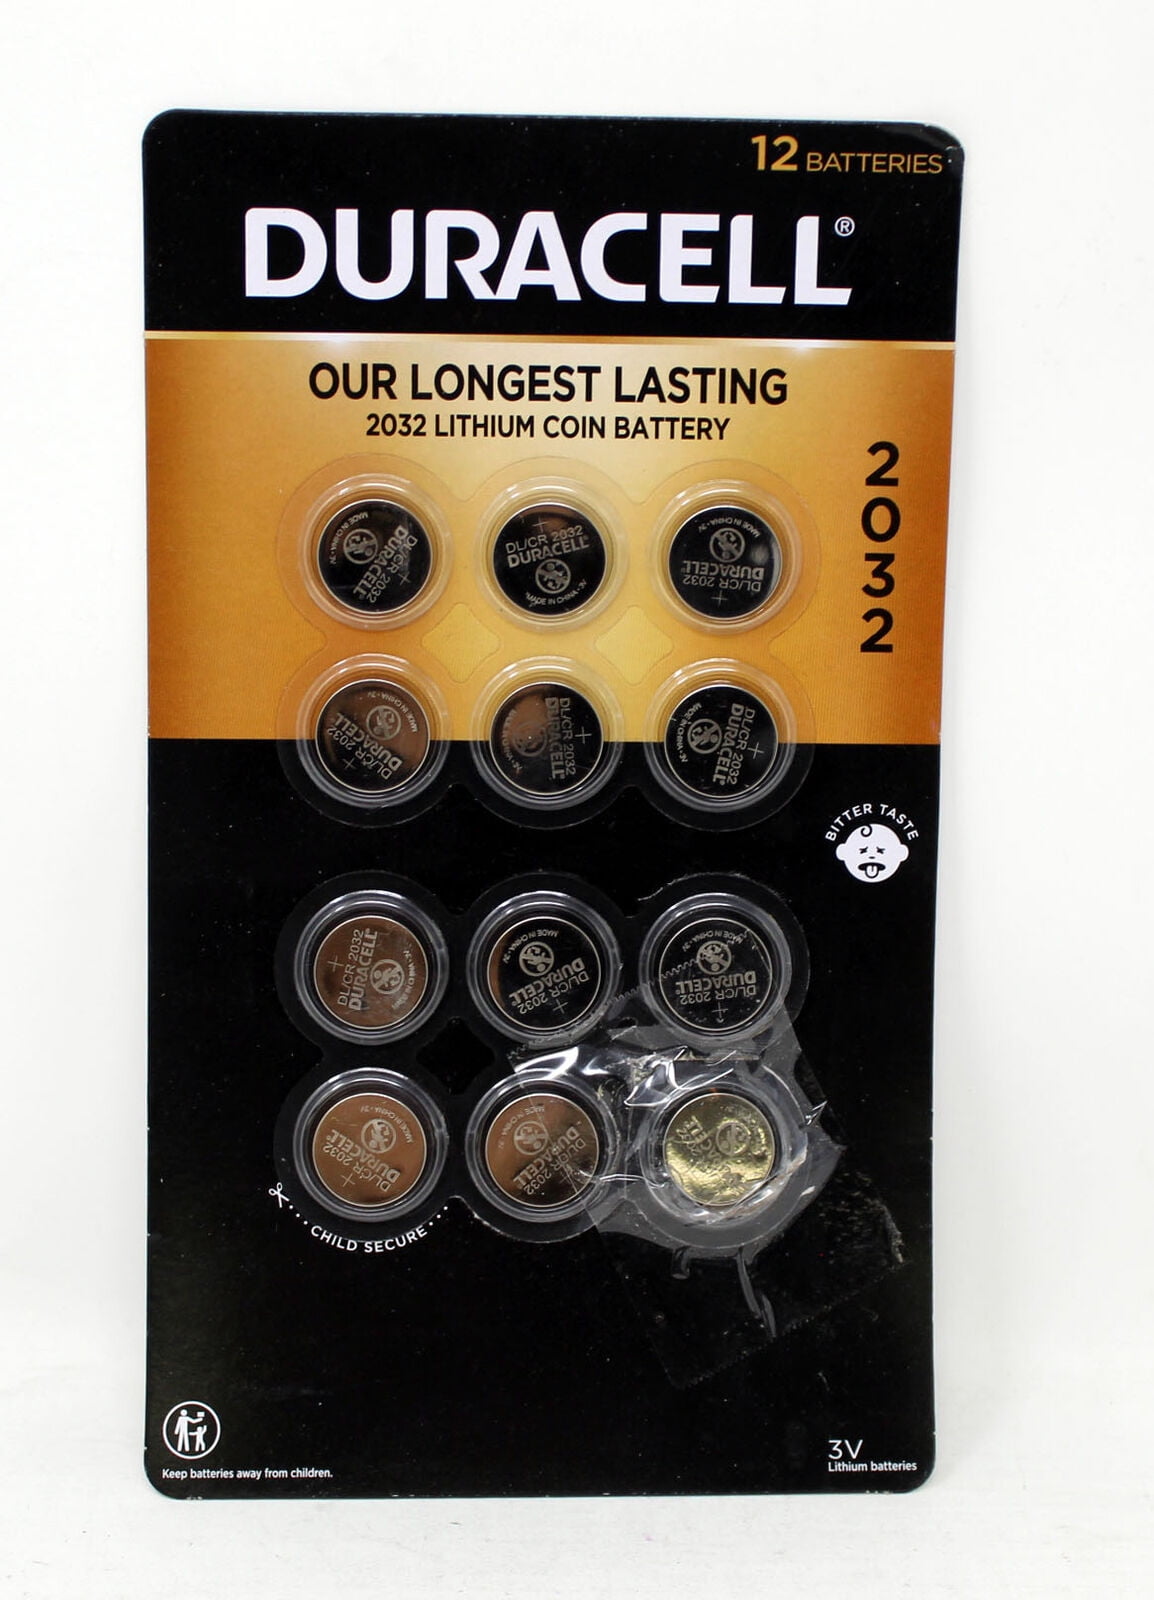 TIL that Duracell 2032 batteries have to be sanded down to work in